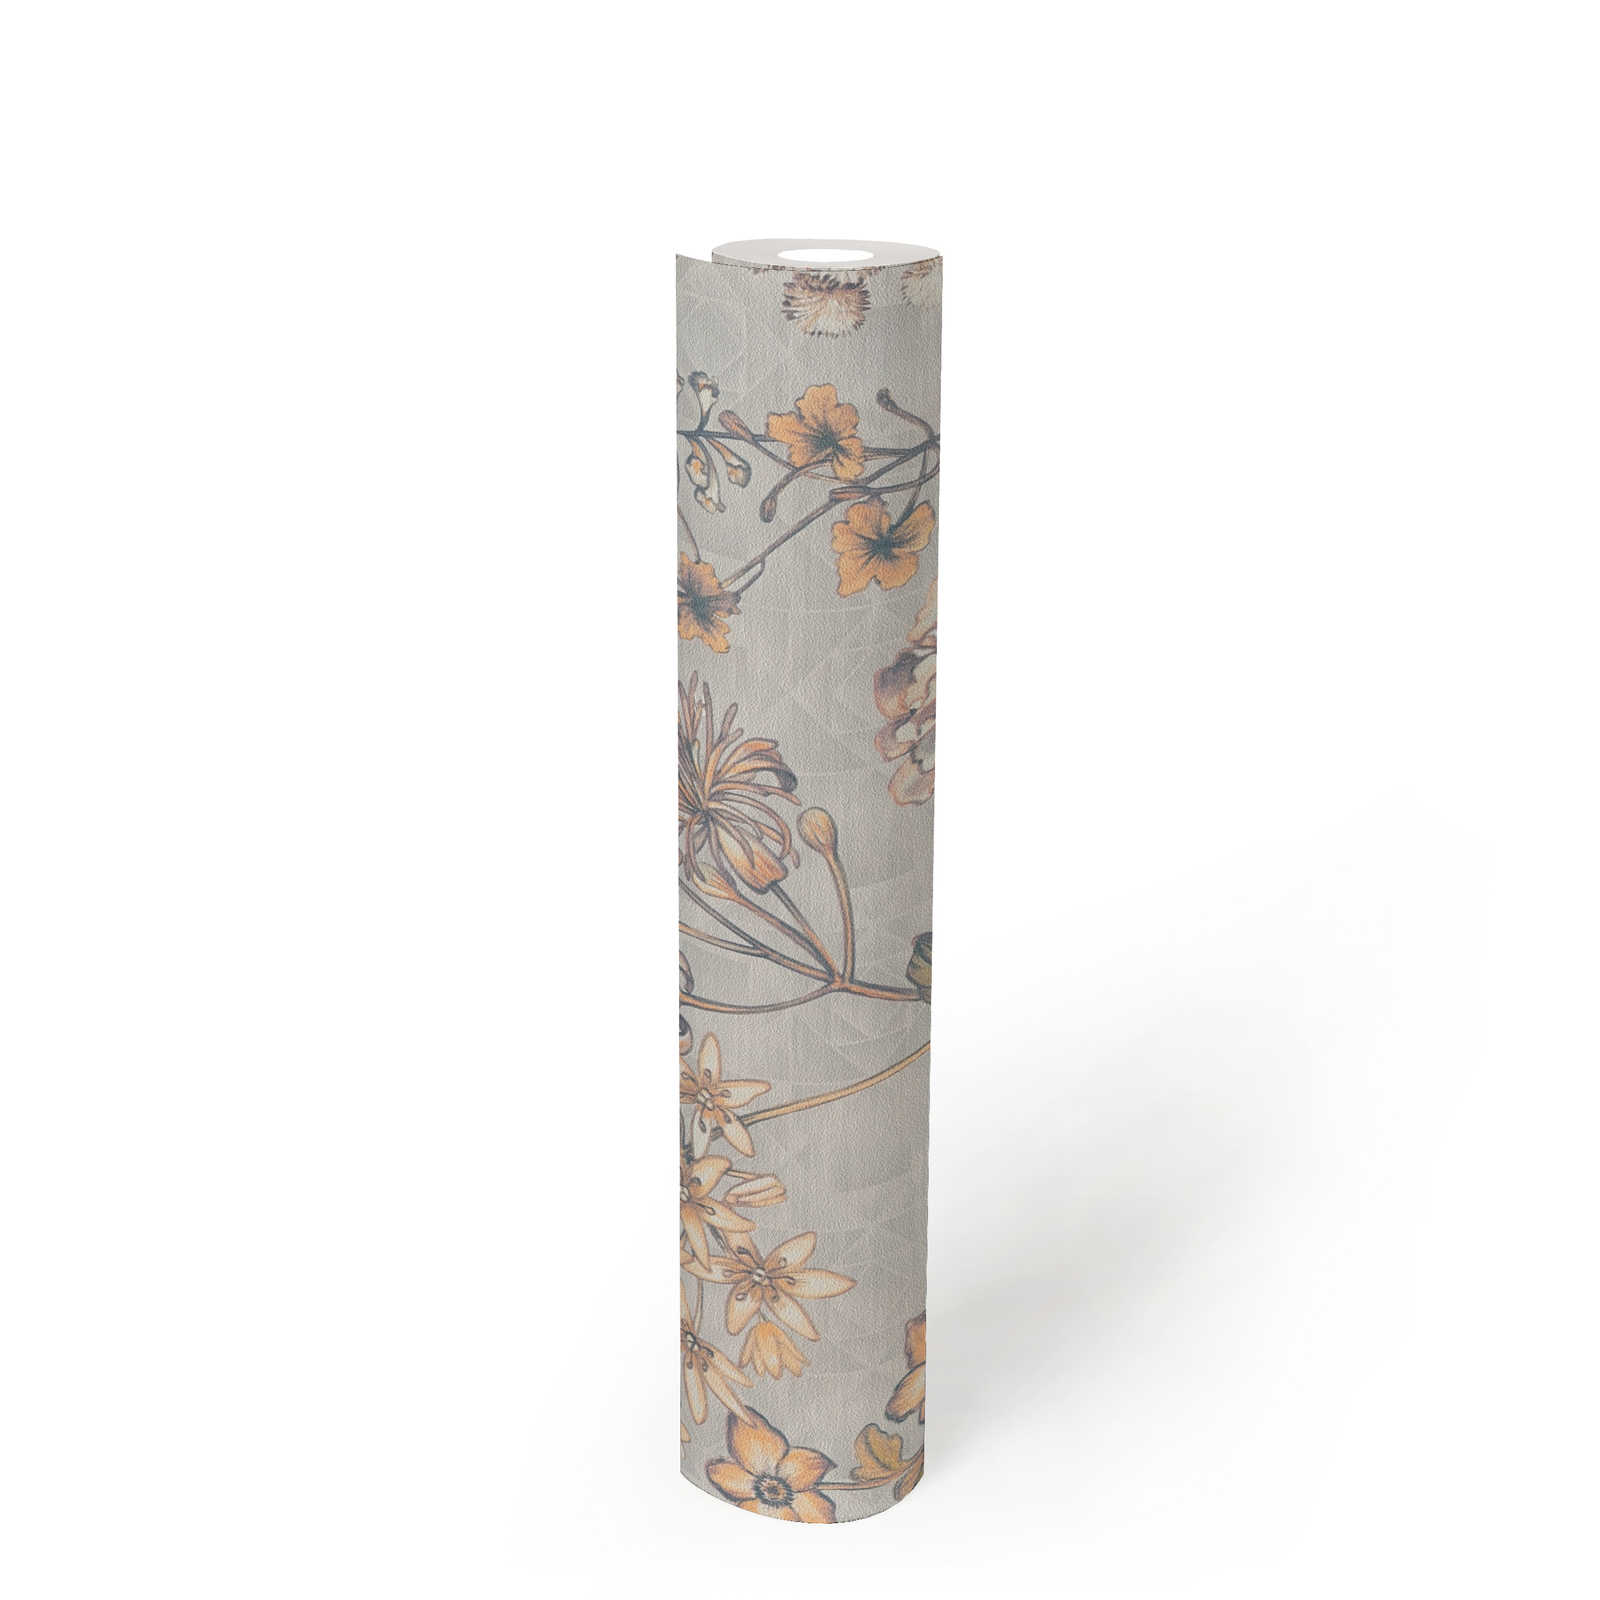             Non-woven wallpaper with floral vintage design - light grey, orange, yellow
        